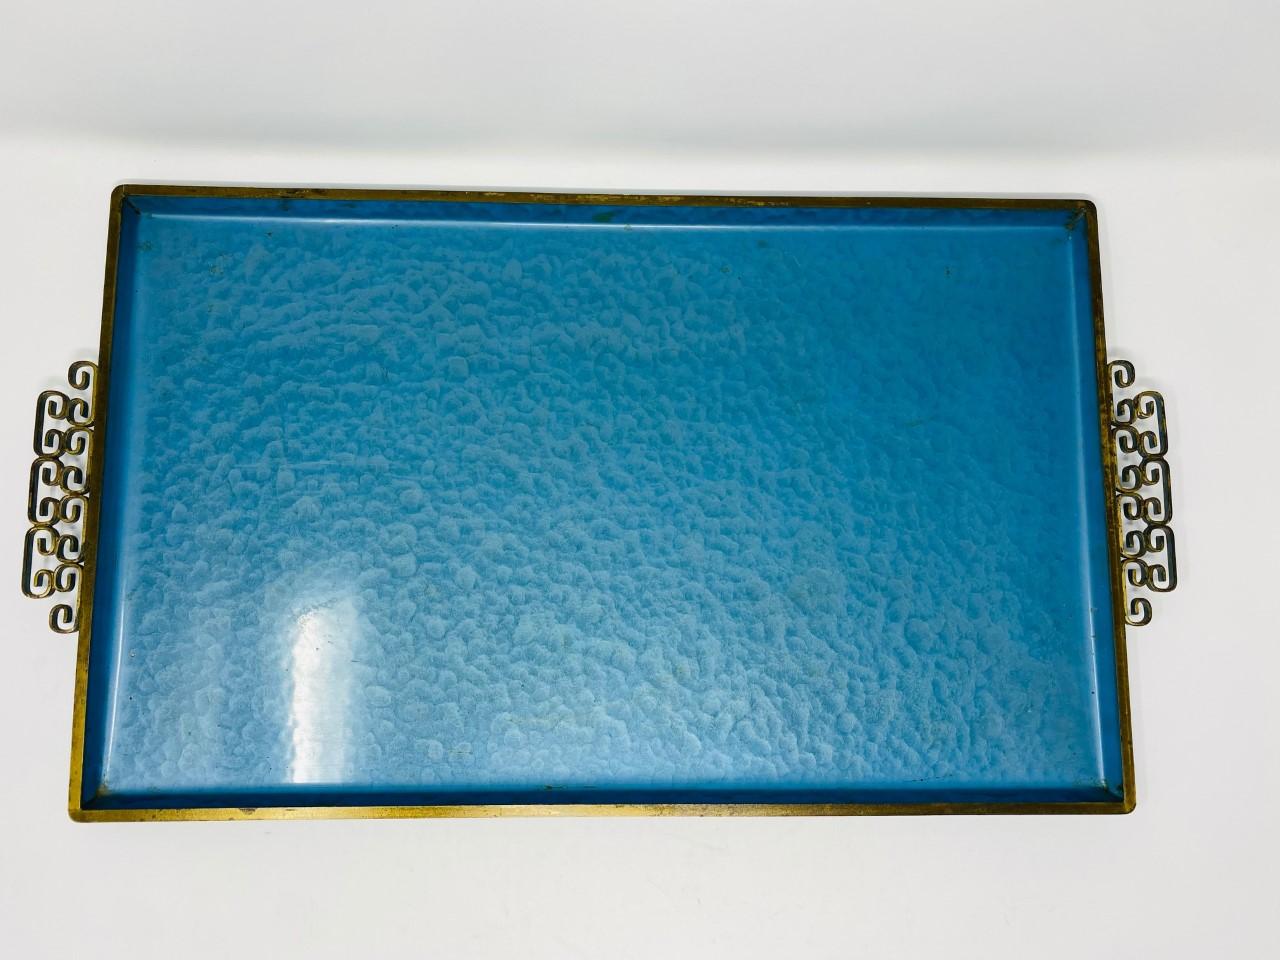 Vintage Mid Century Kyes Moire’ Glaze Brass and Enamel Blue Tray 1960s 1